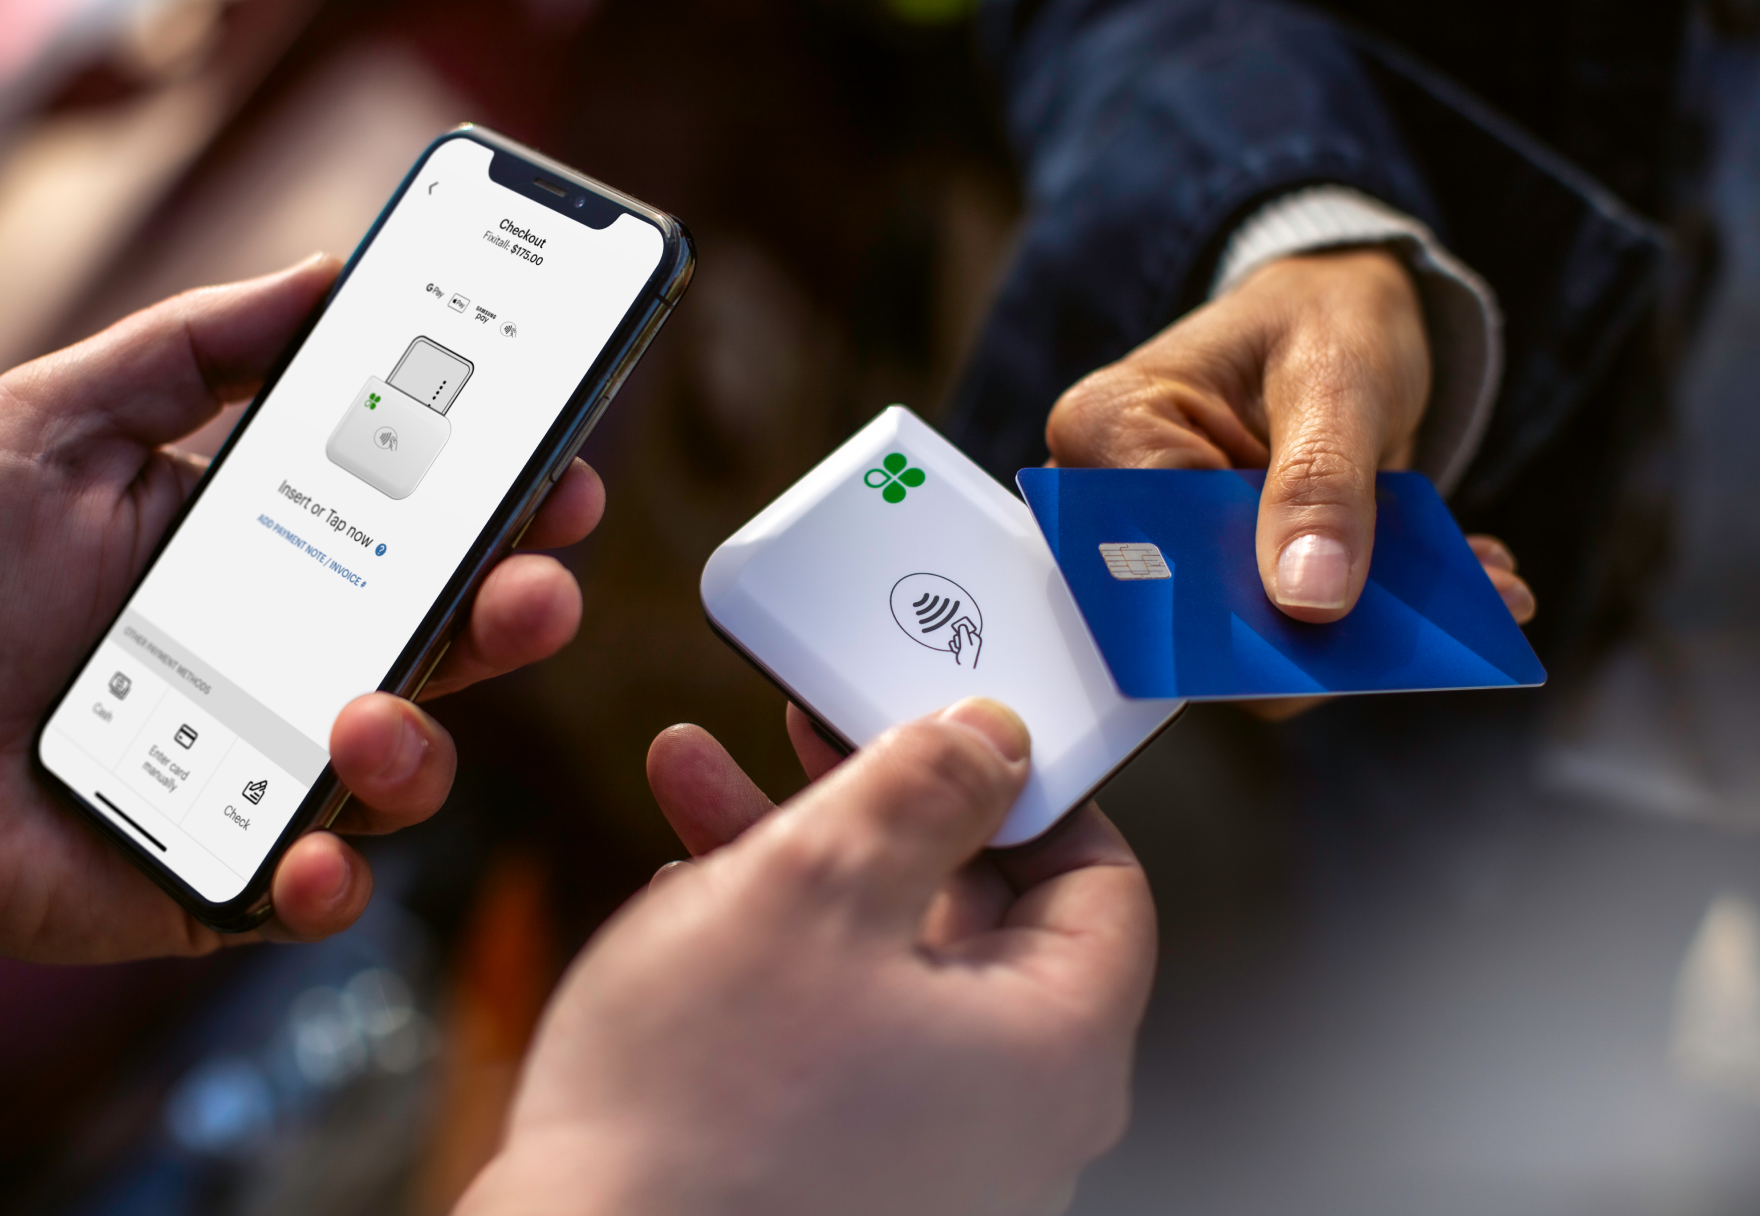 Takes Shopping Offline With a New Mobile Credit Card Reader